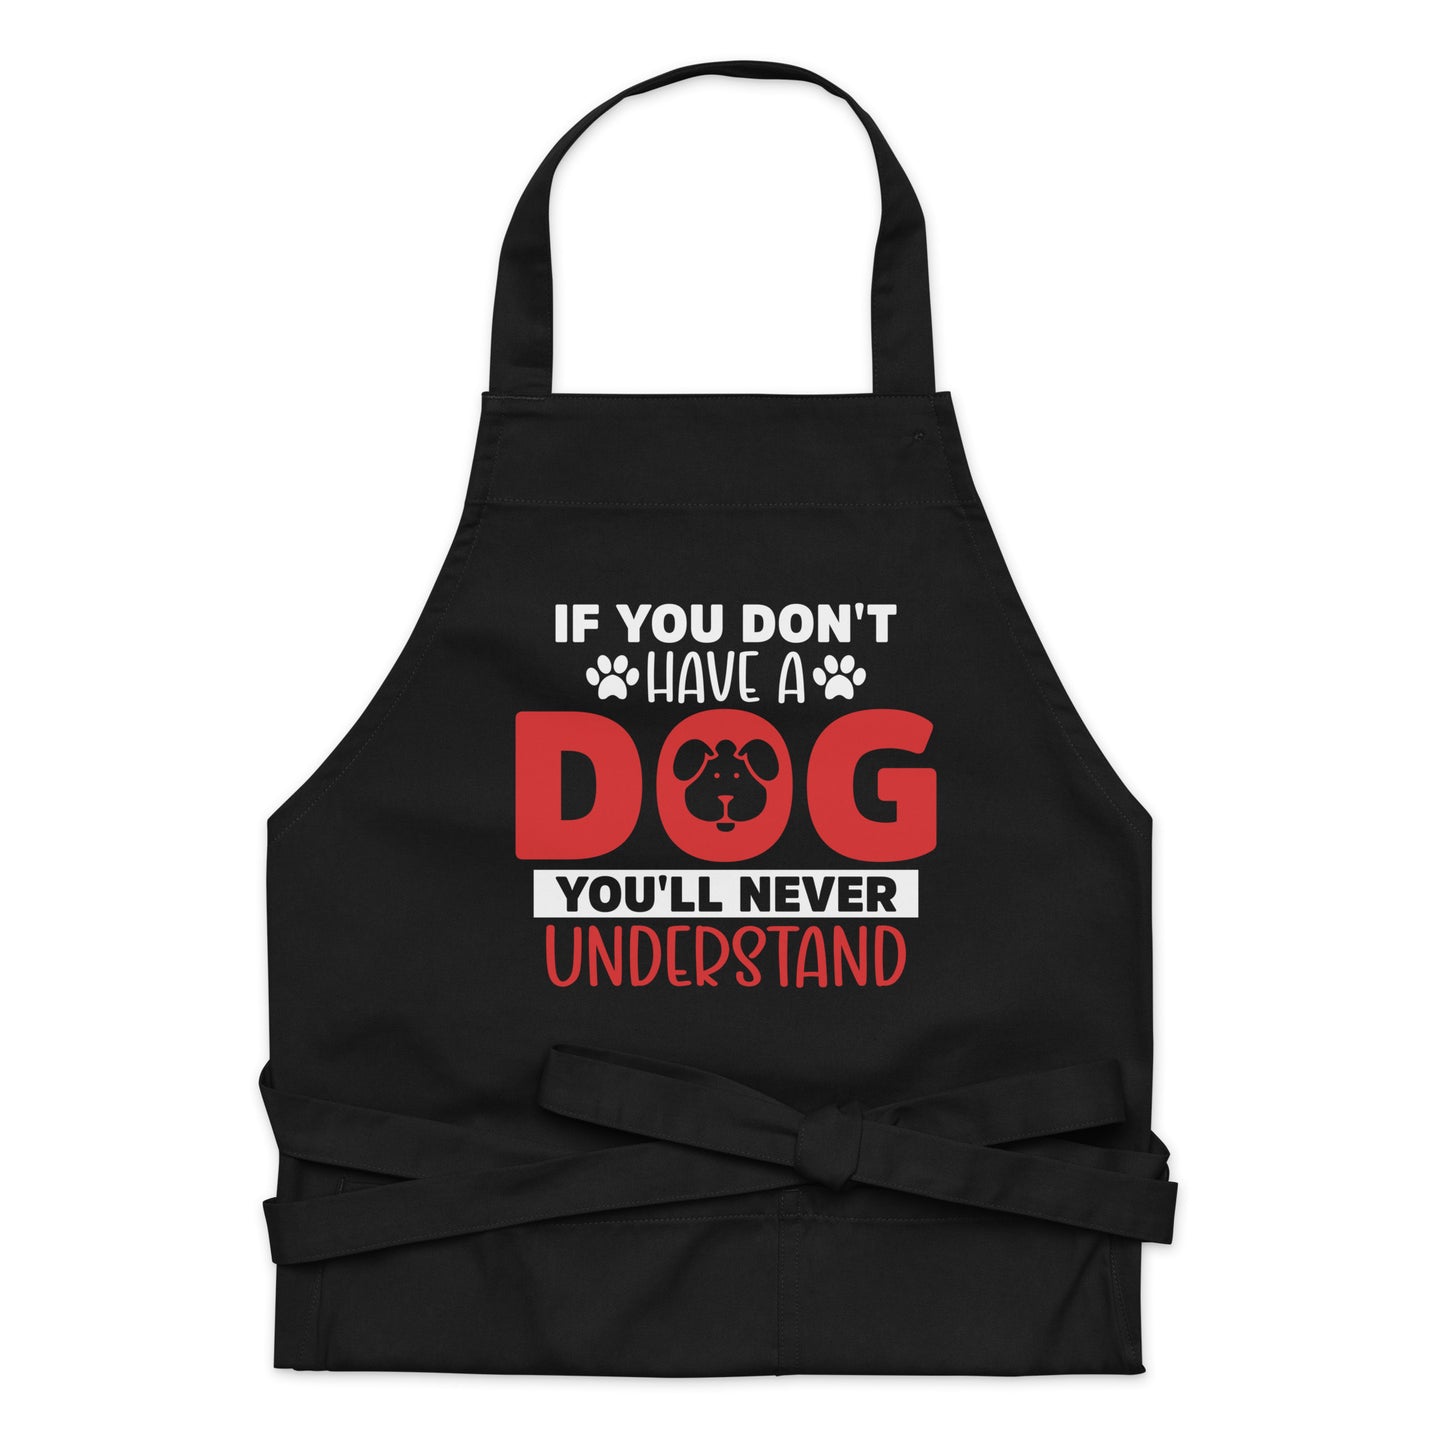 If You Don't Have a Dog You'll Never Understand Organic cotton apron